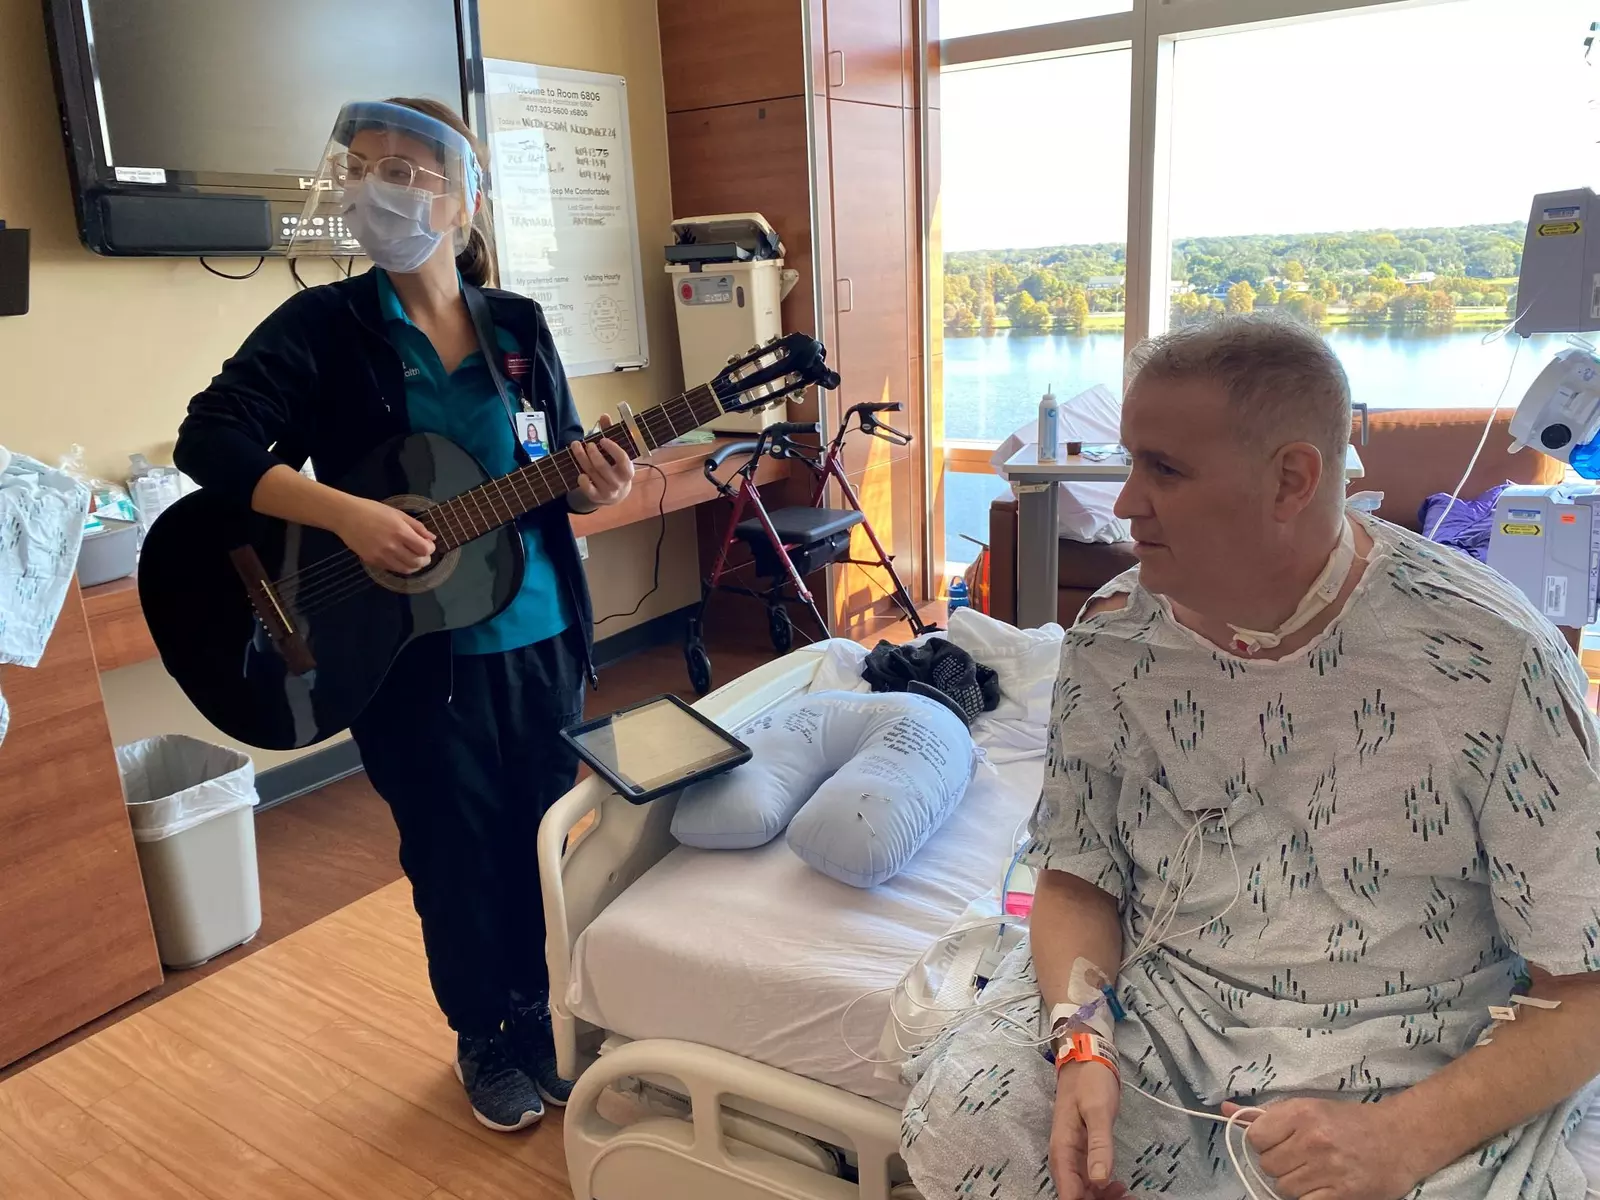 David Wilkinson, AdventHealth Orlando's first COVID lung transplant recipient, with music therapist Hannah Warner as she plays guitar.